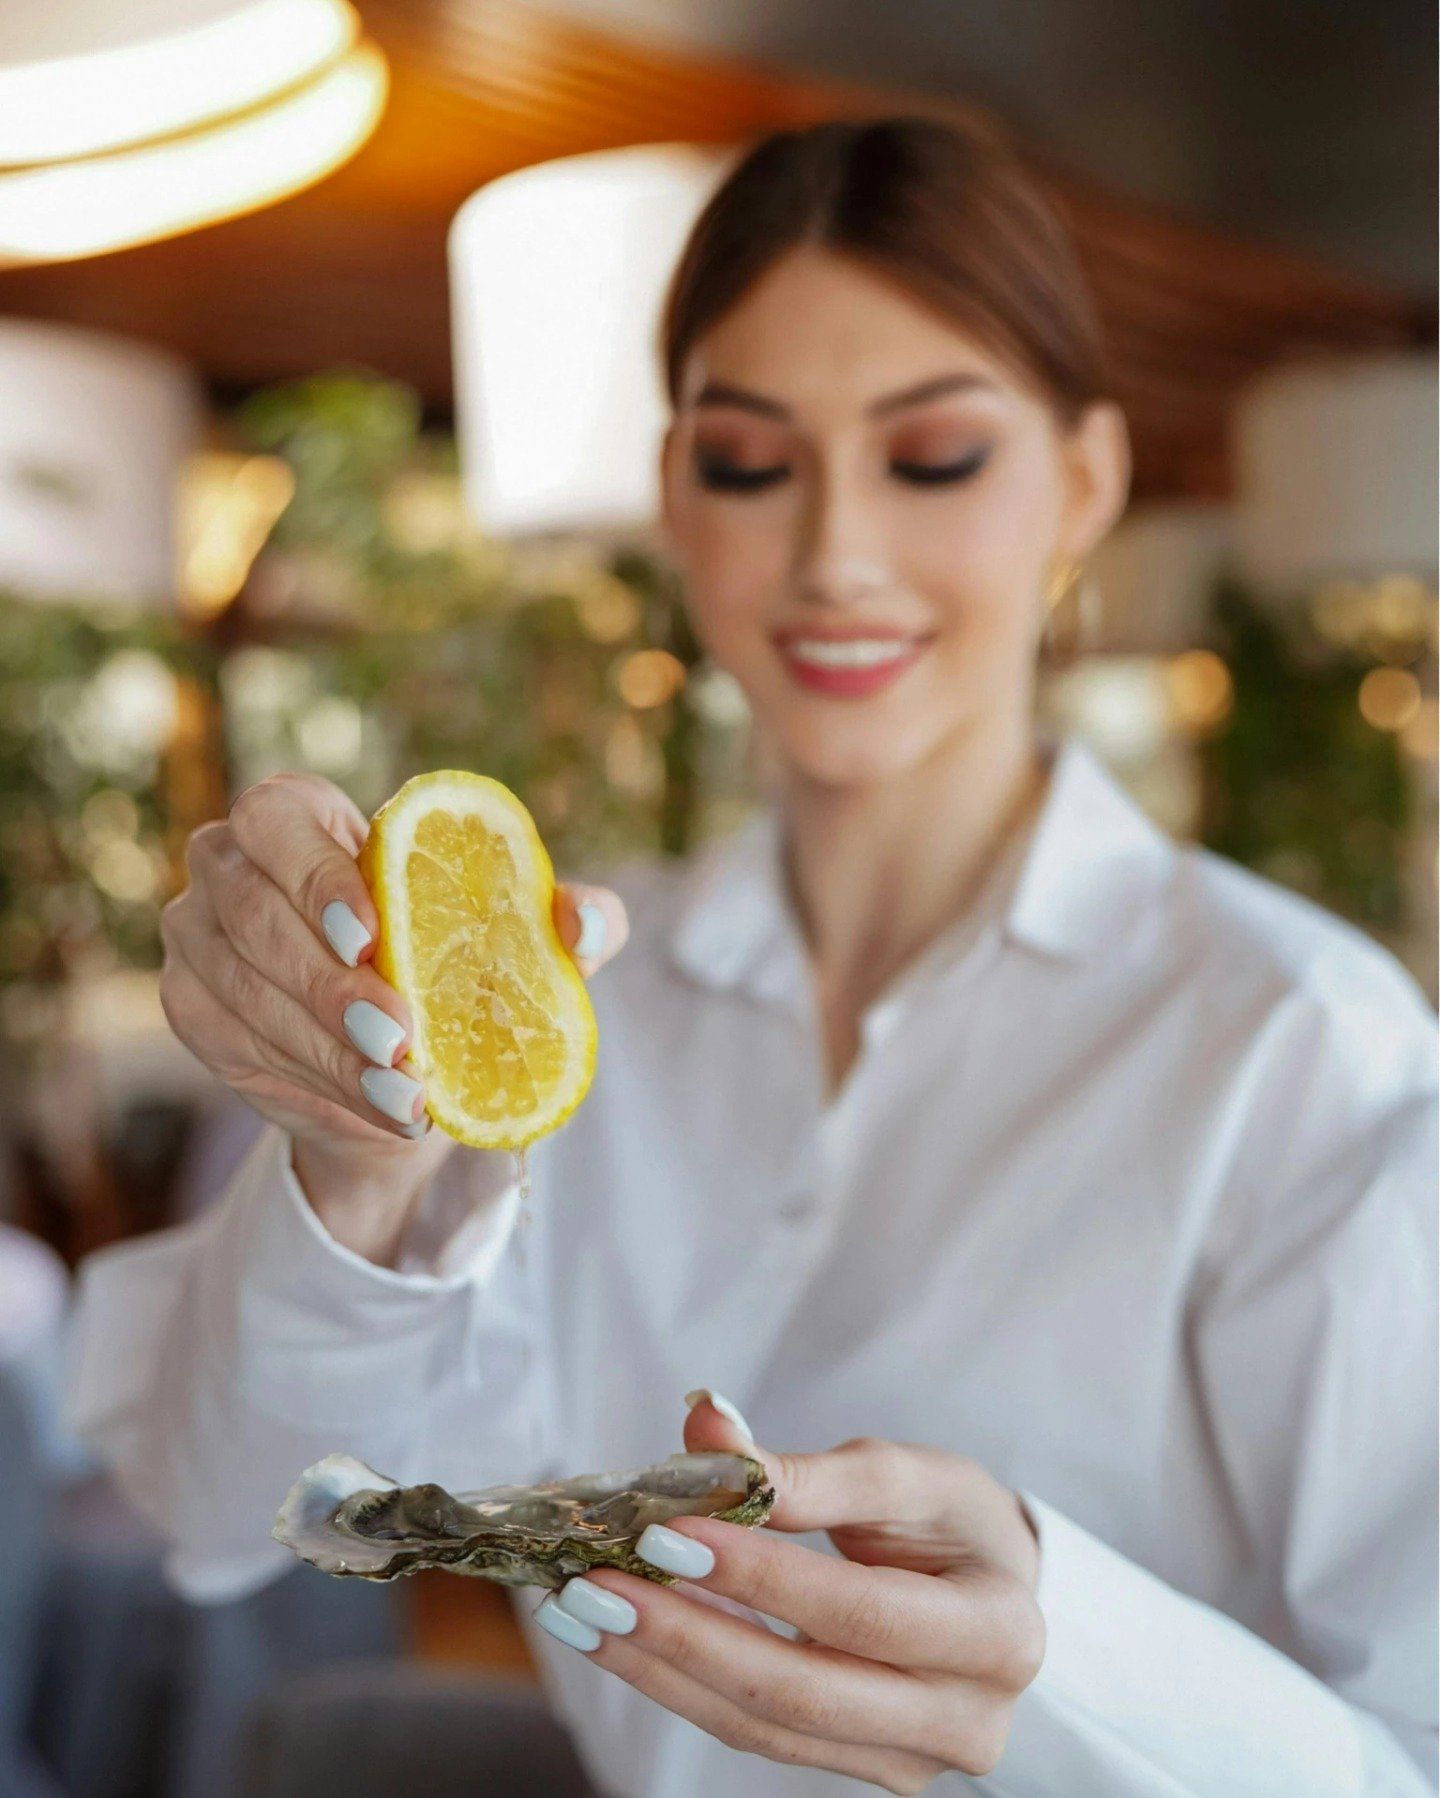 Enhance your oyster experience with a squeeze of fresh lemon&mdash;a timeless classic! 🍋🦪

#OysterAndLemon #ClassicCombo